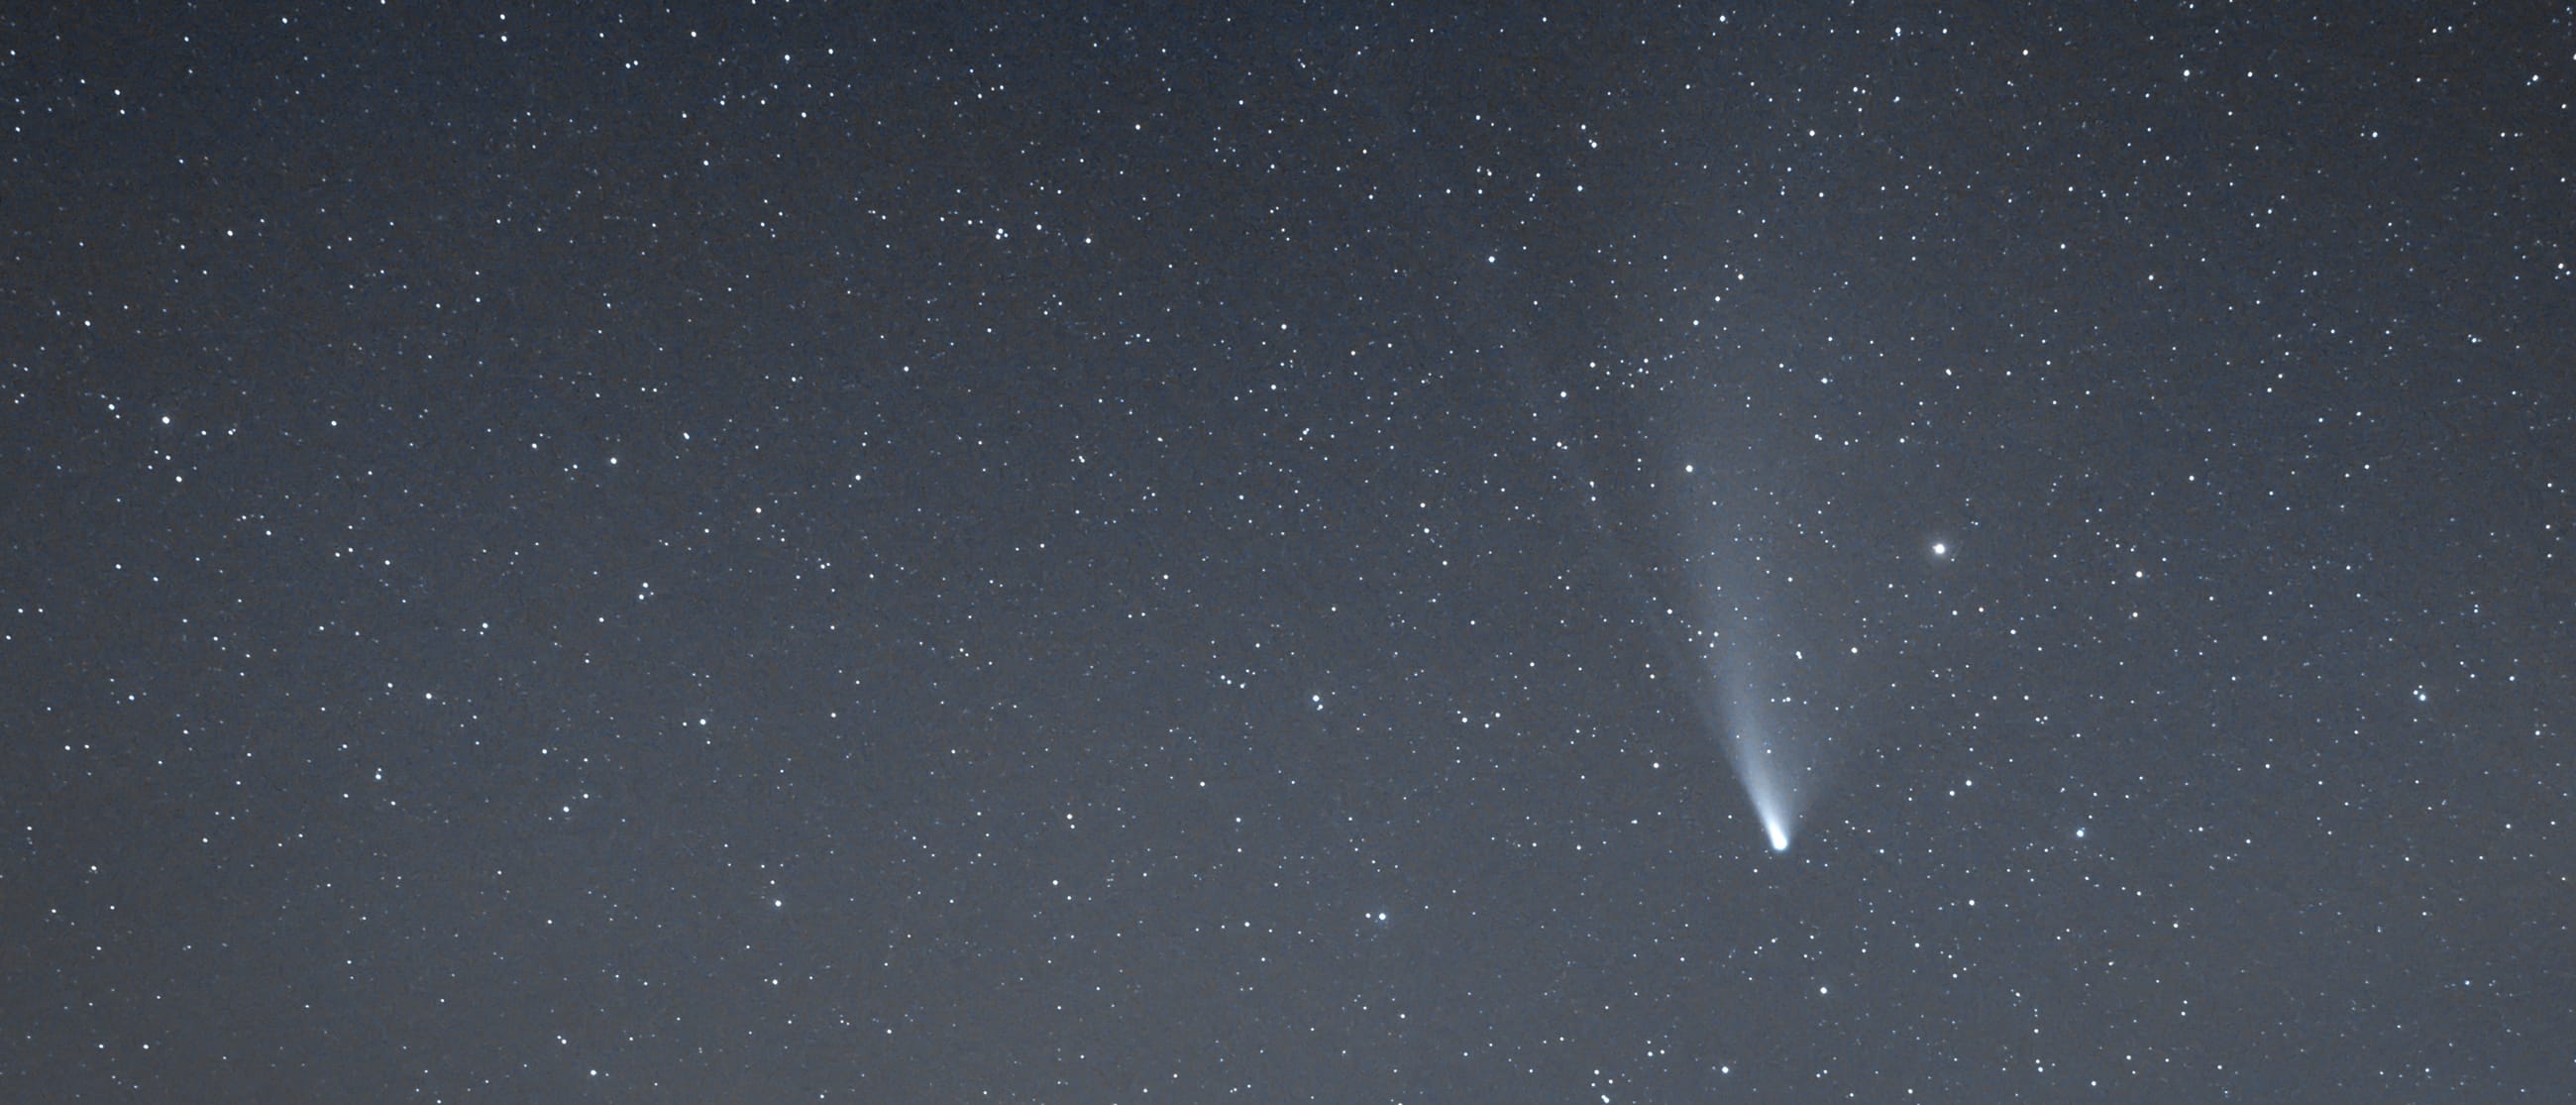 Comet NEOWISE Dust Trail